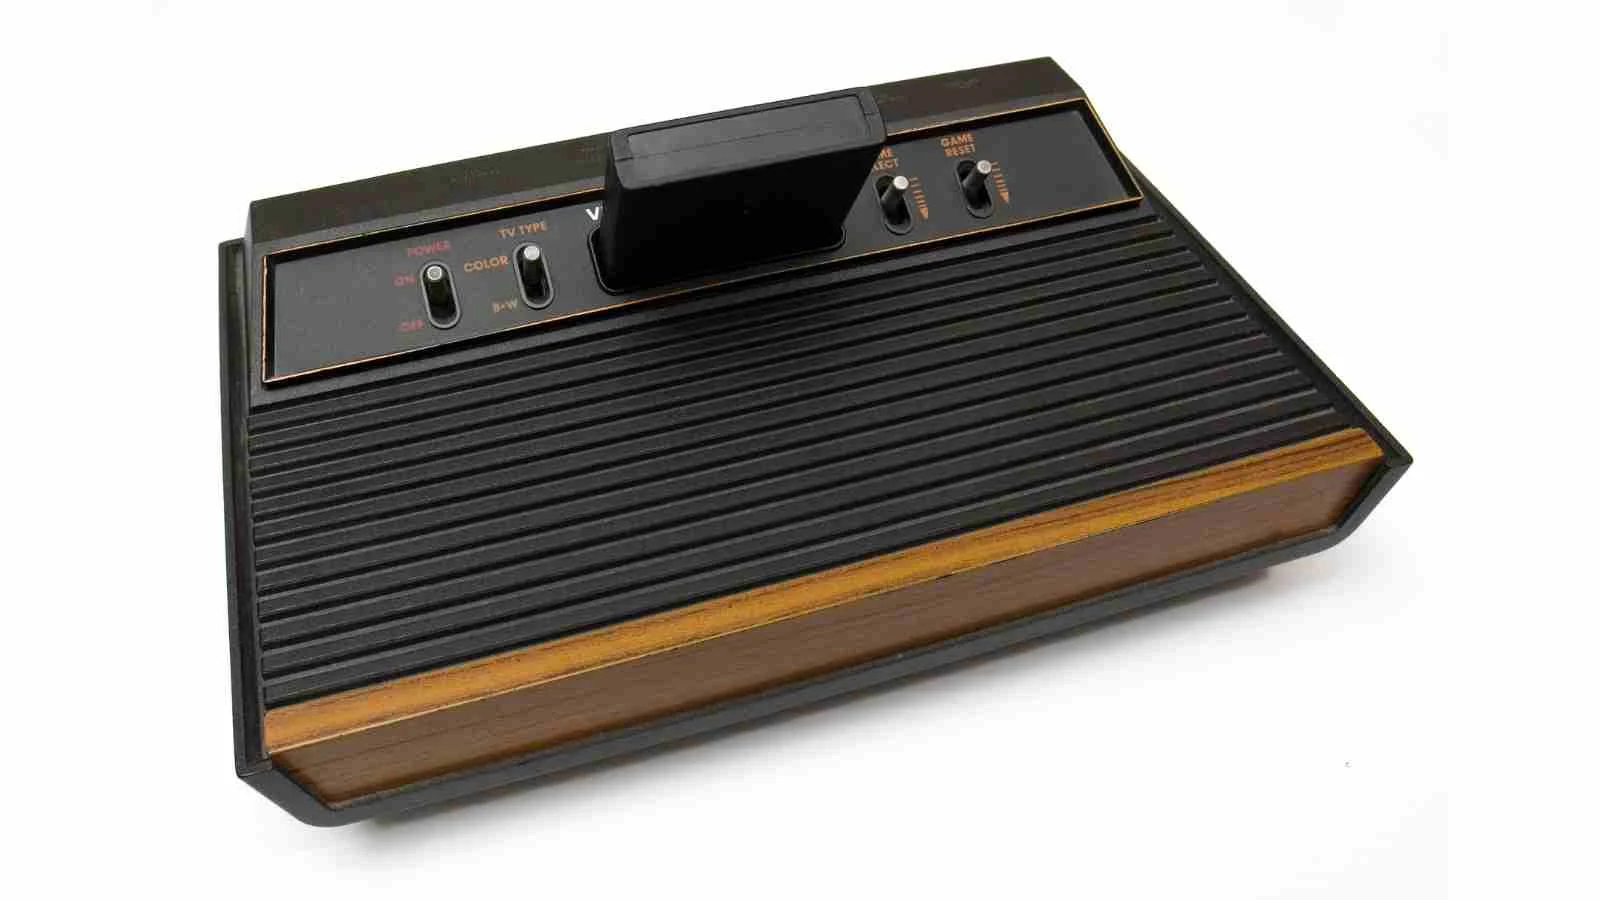 An Atari console from the 1980s